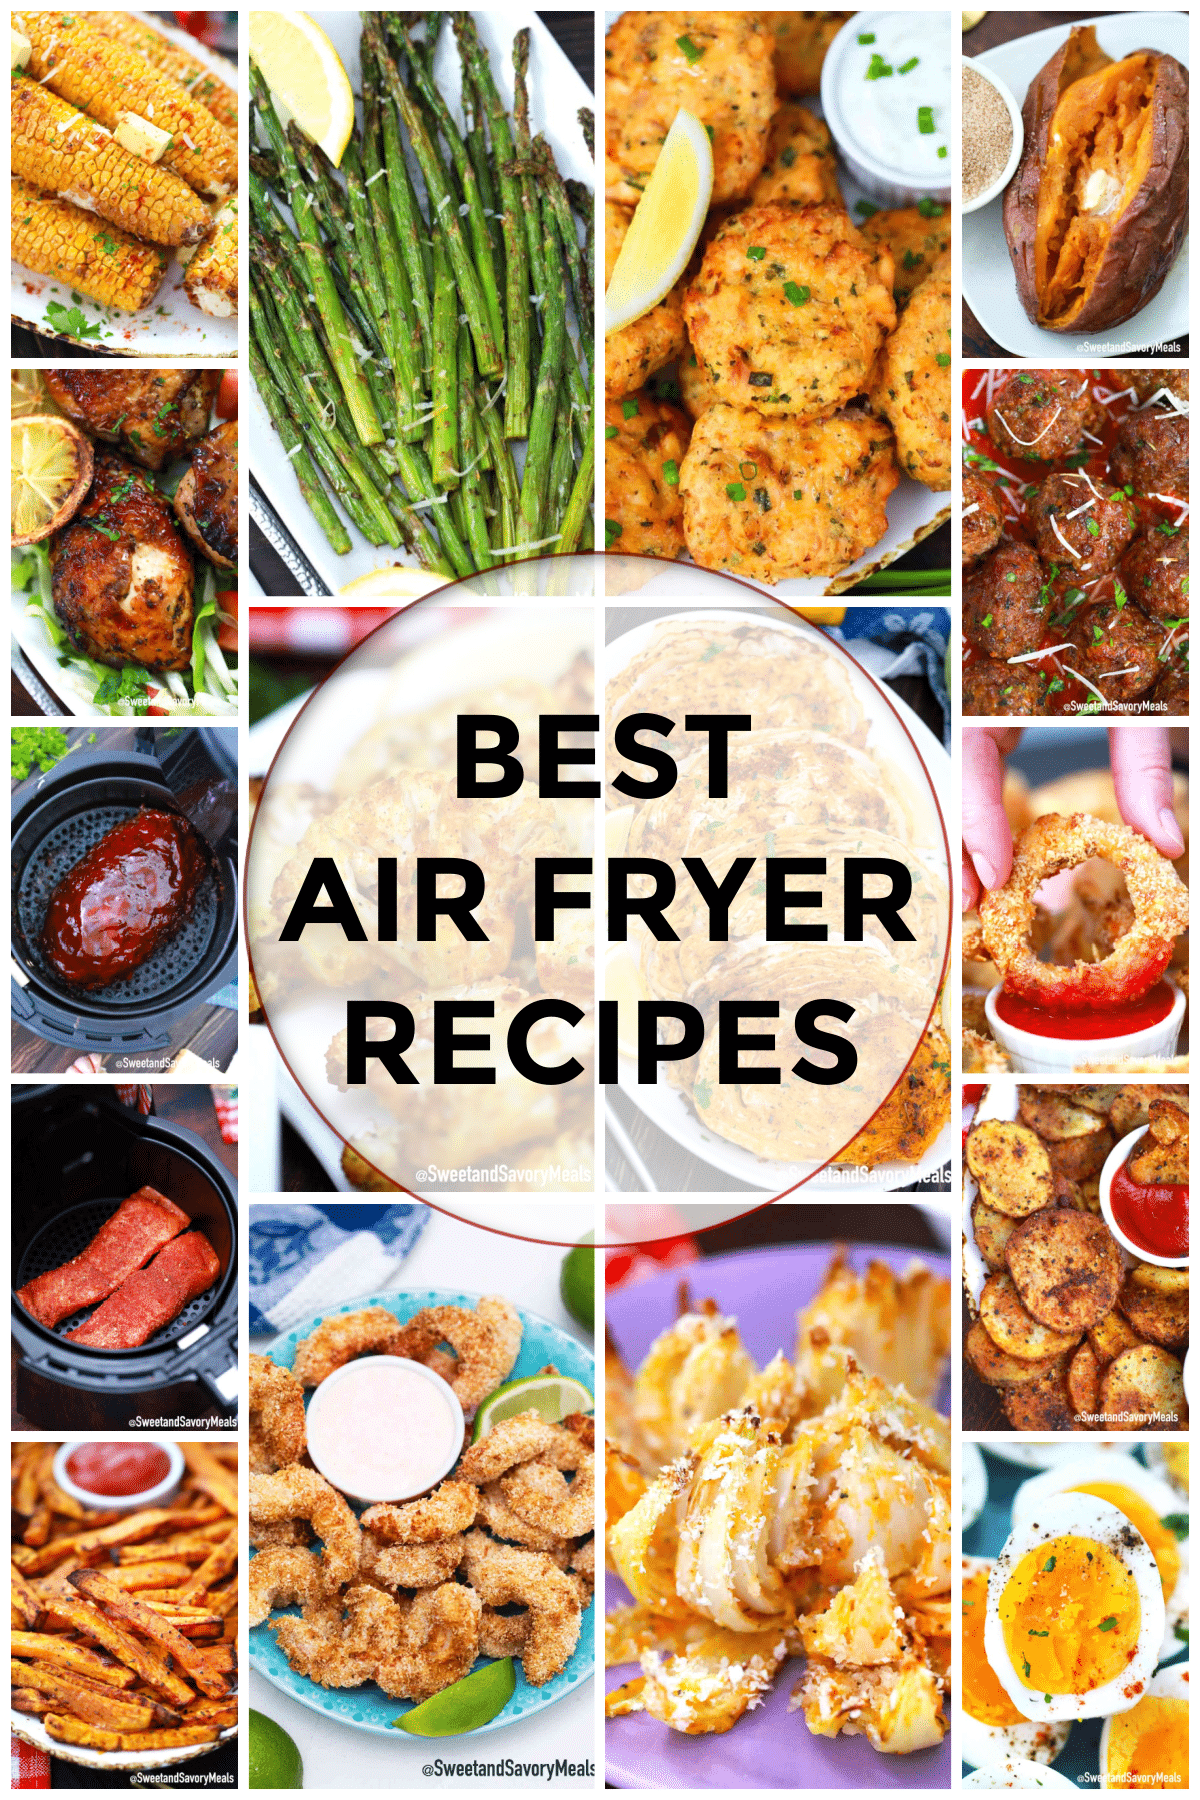 Our 15 Best Air Fryer Recipes